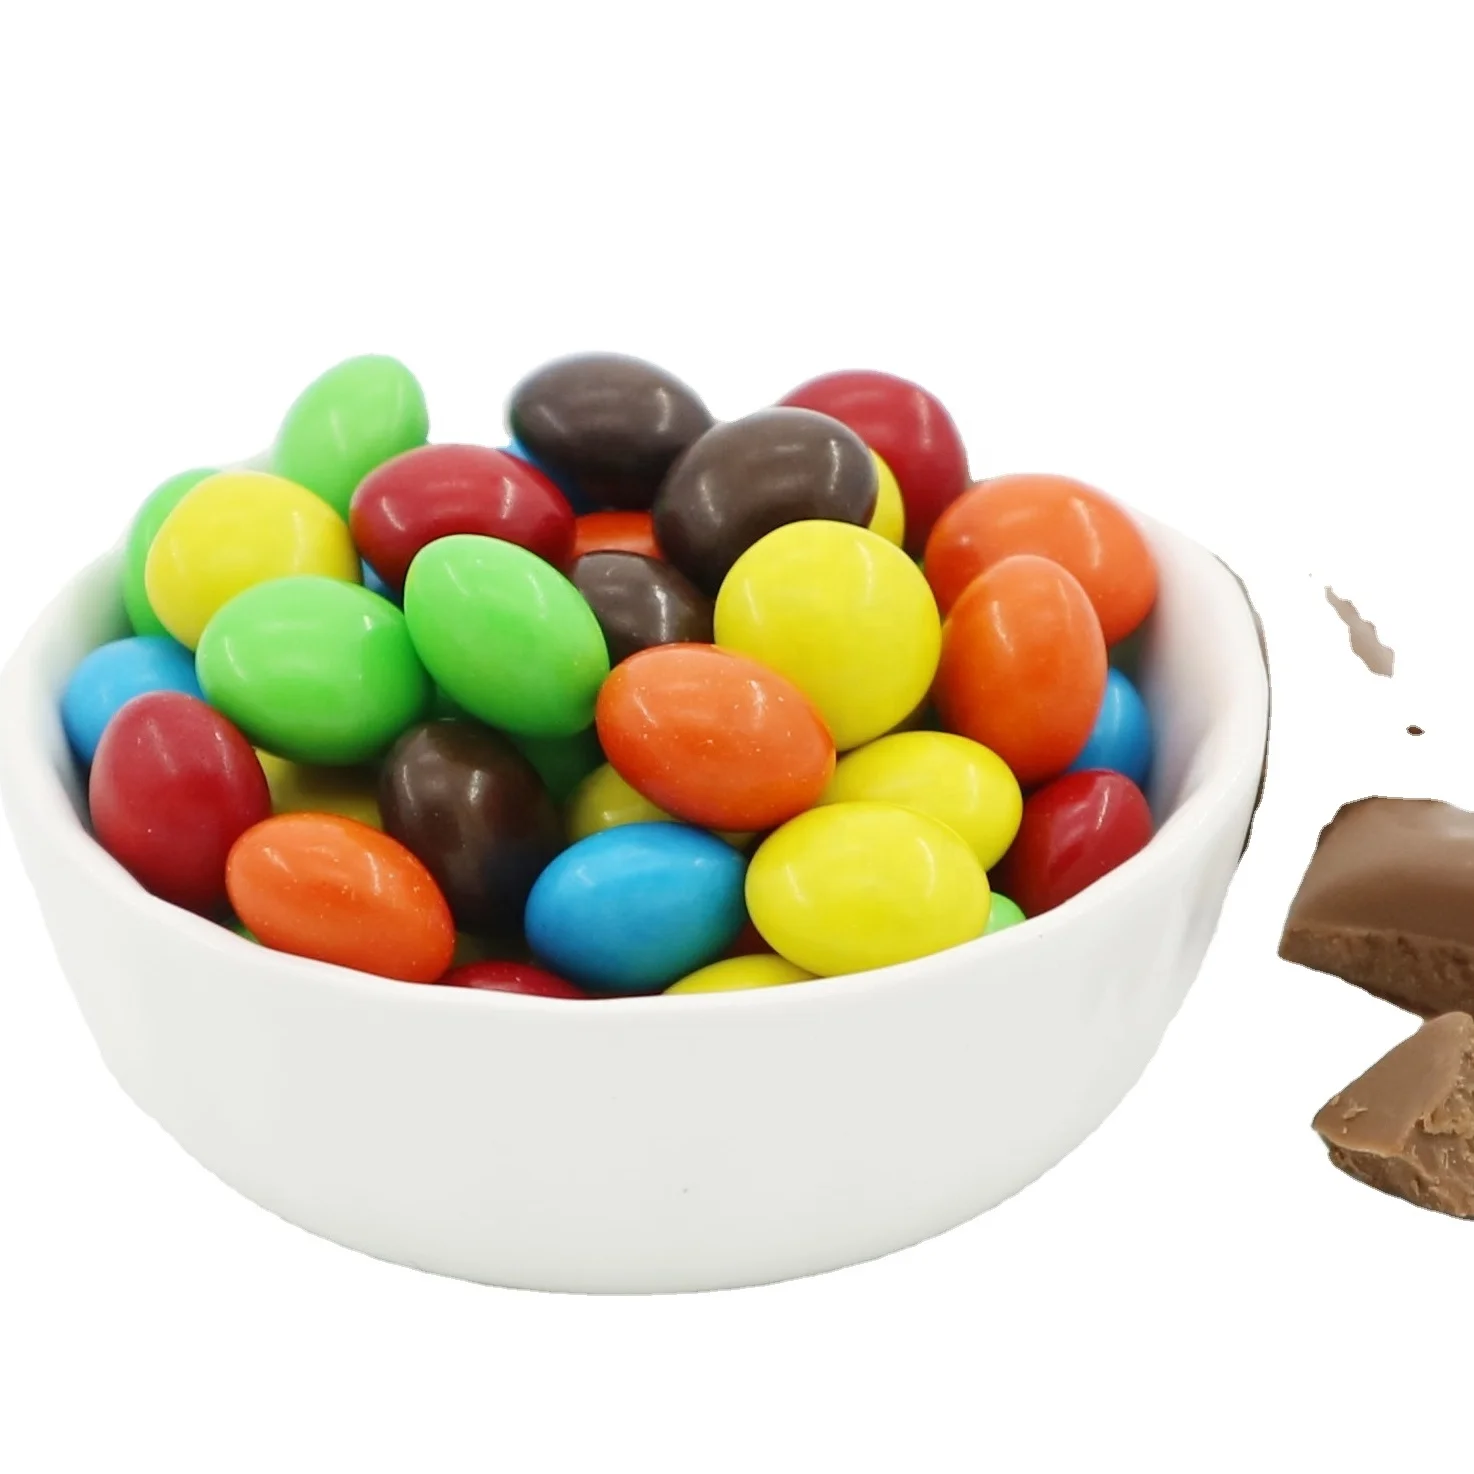 High quality 6 colors mix choc bean sweet button shape chocolate confectionery